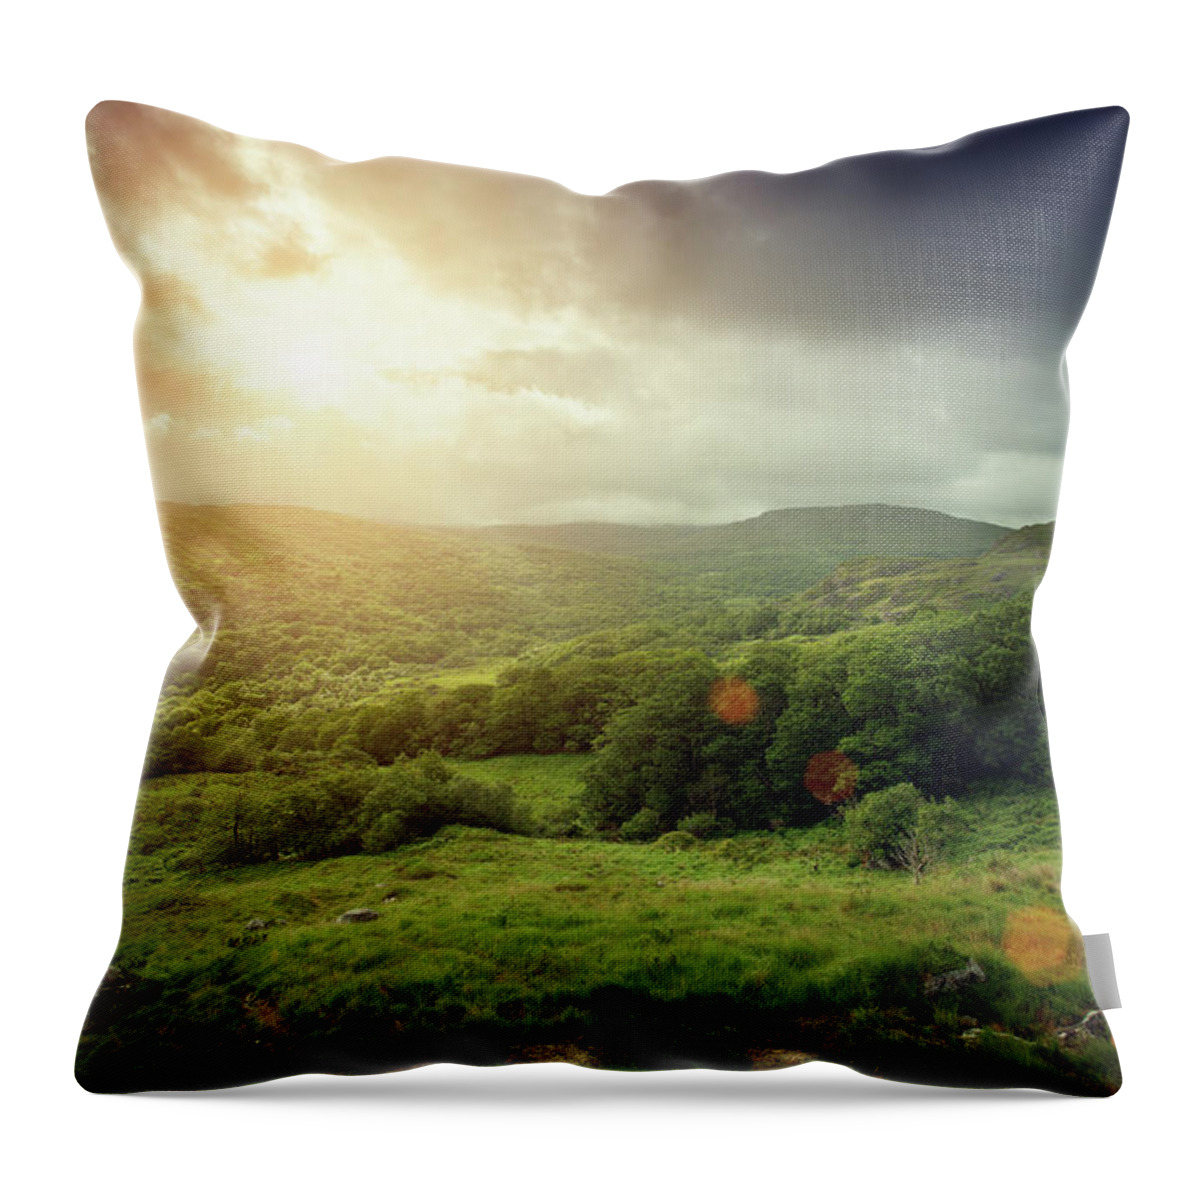 Scenics Throw Pillow featuring the photograph Forest Covered Mountains At Sunrise by Mammuth